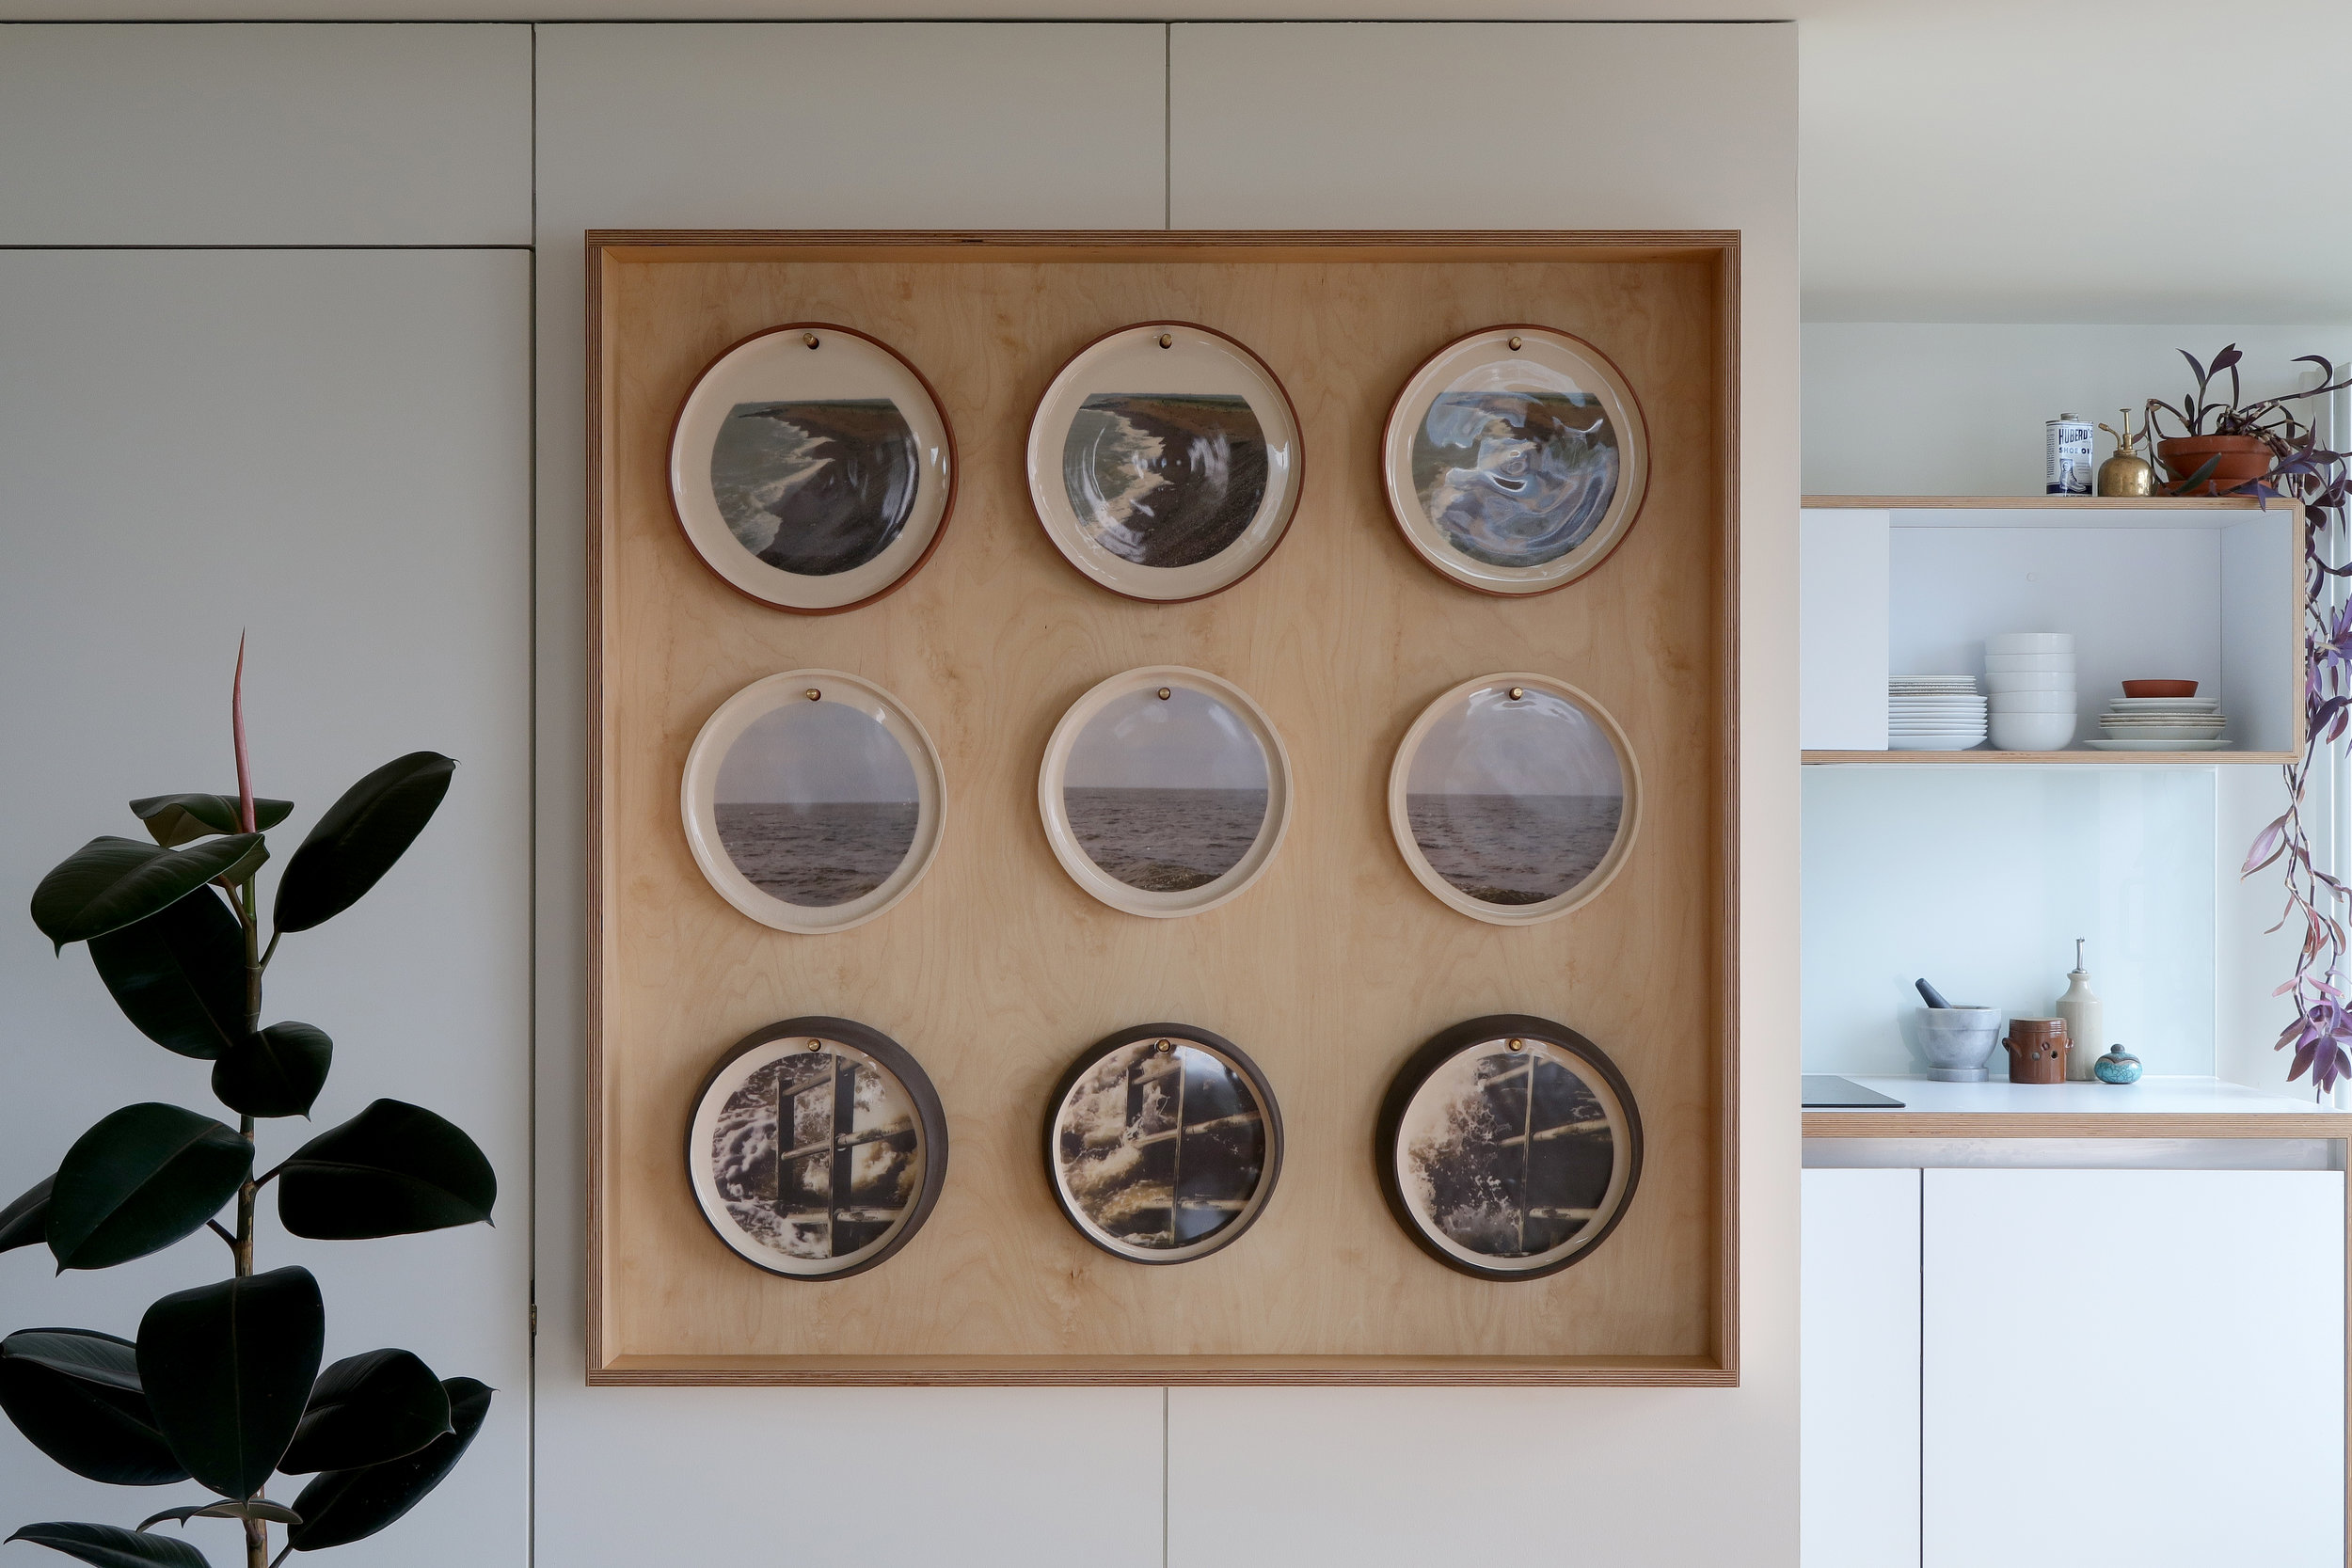  &nbsp;A three second series. Thrown and burnished terracotta, stoneware and black clays, decorated with slip, glaze and digital film stills. Custom display case in waxed birch with brass and leather detail pegs. 